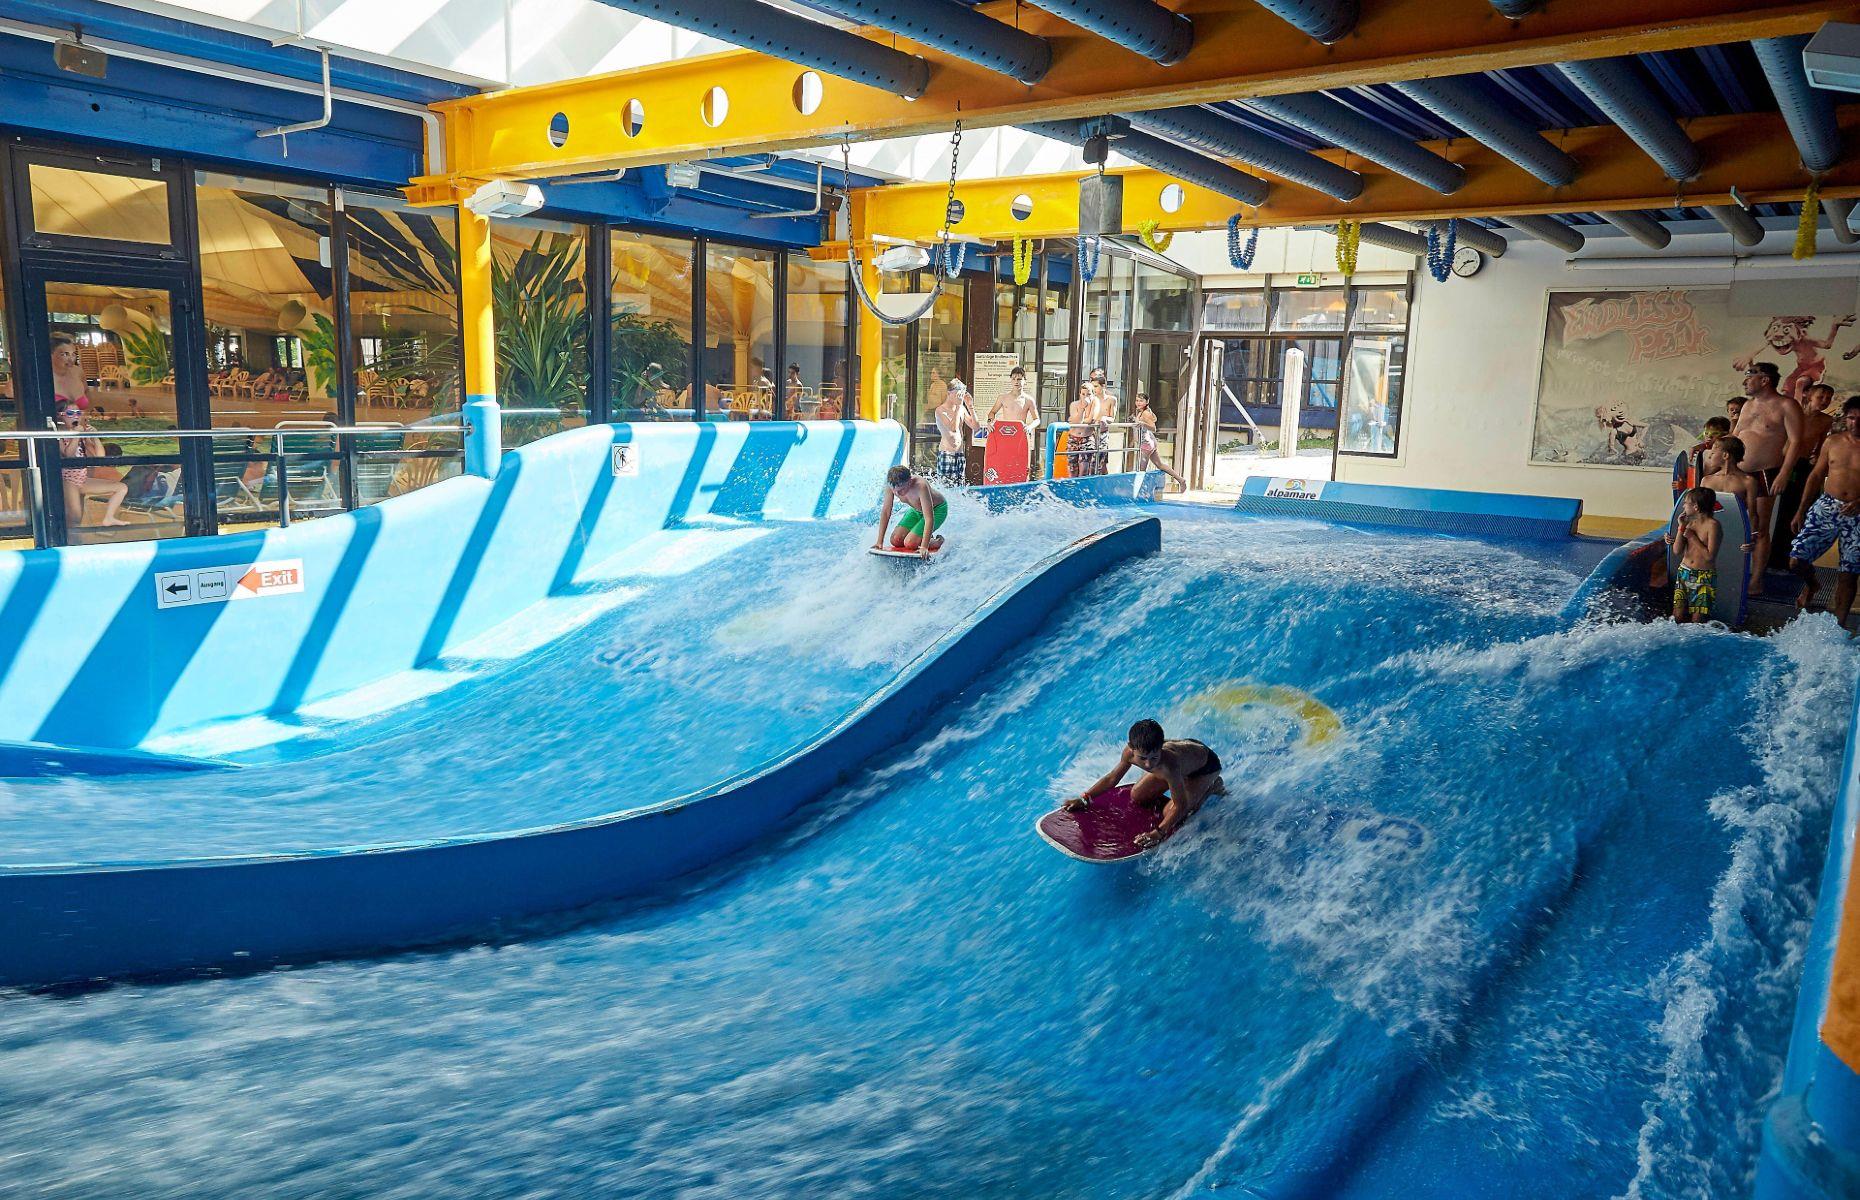 <p>Set in Pfaeffikon within the Canton of Schwyz, <a href="https://www.alpamare.ch">Alpamare</a> stakes its claim as Europe's biggest covered water park, although it does have some outdoor heated pools too. Test out some of the 11 fun and themed waterslides – IceXpress promises a chilly surprise while Tornado comes complete with light and sound effects. Then go for a rejuvenating soak in the salt bath that's heated to a blissful 36°C (97°F).</p>